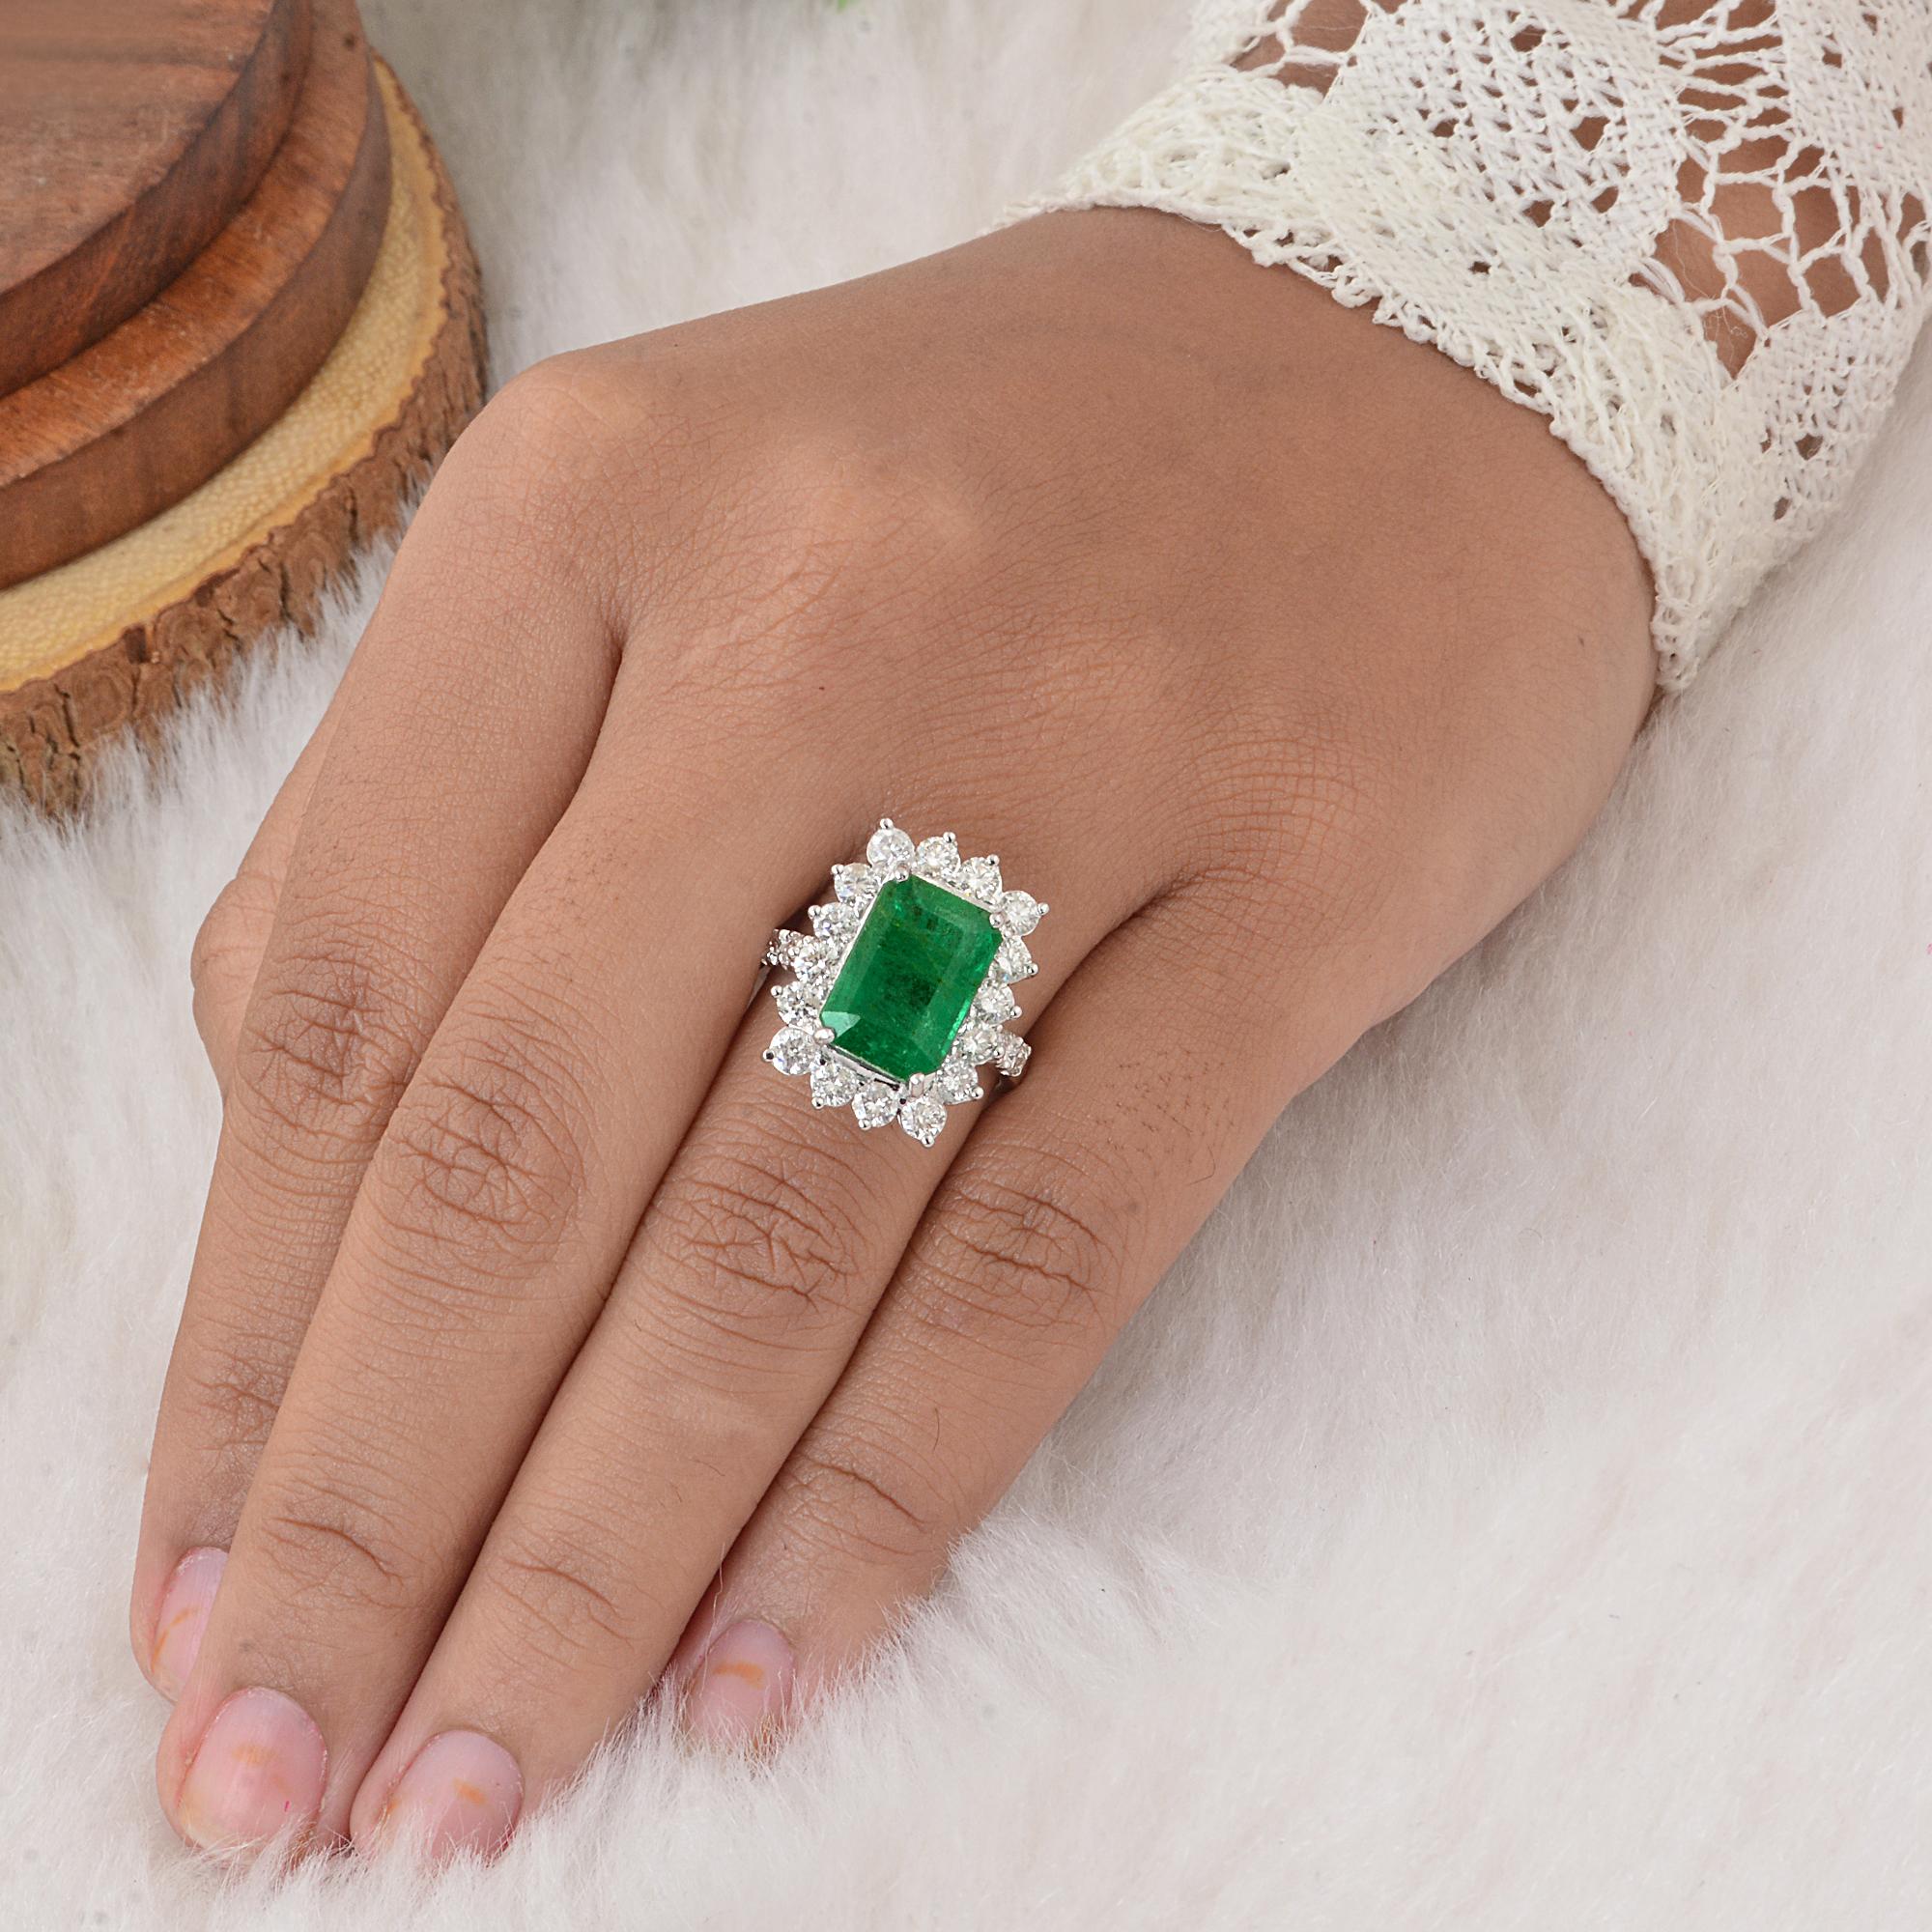 For Sale:  Natural Emerald Gemstone Cocktail Ring Diamond Solid 18k White Gold Fine Jewelry 4